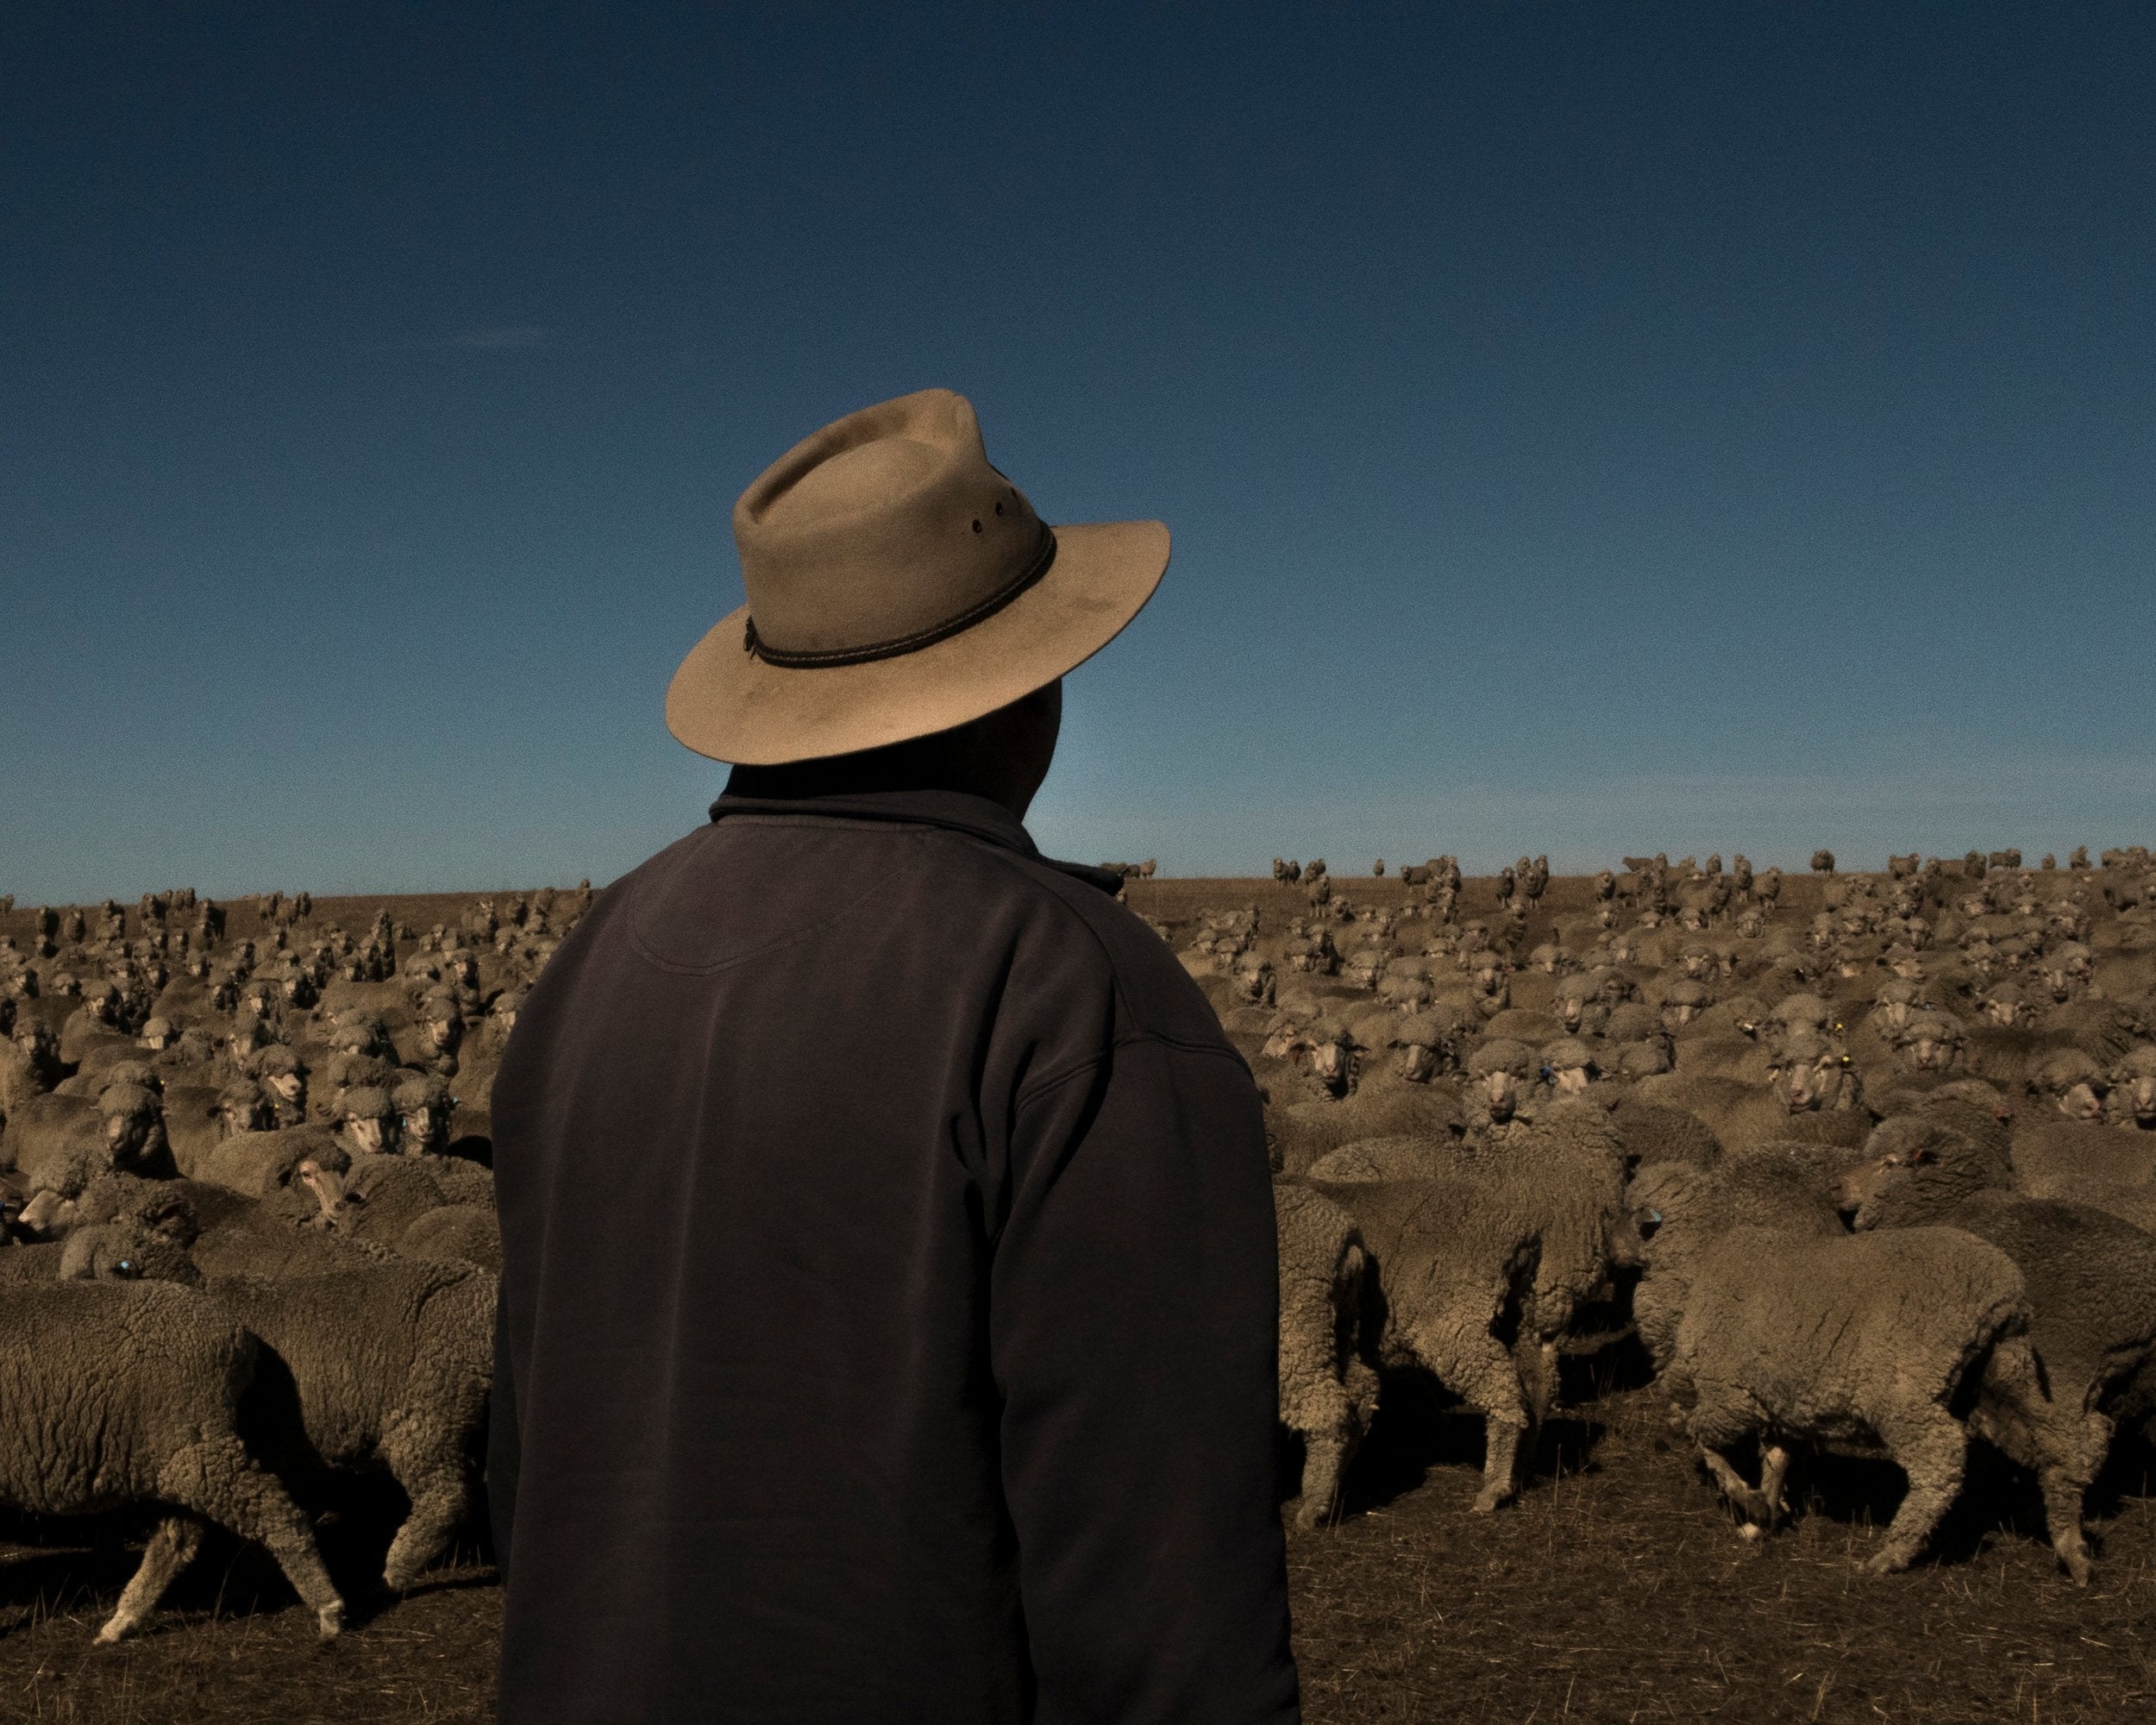 Colin Seis on his farm in New South Wales